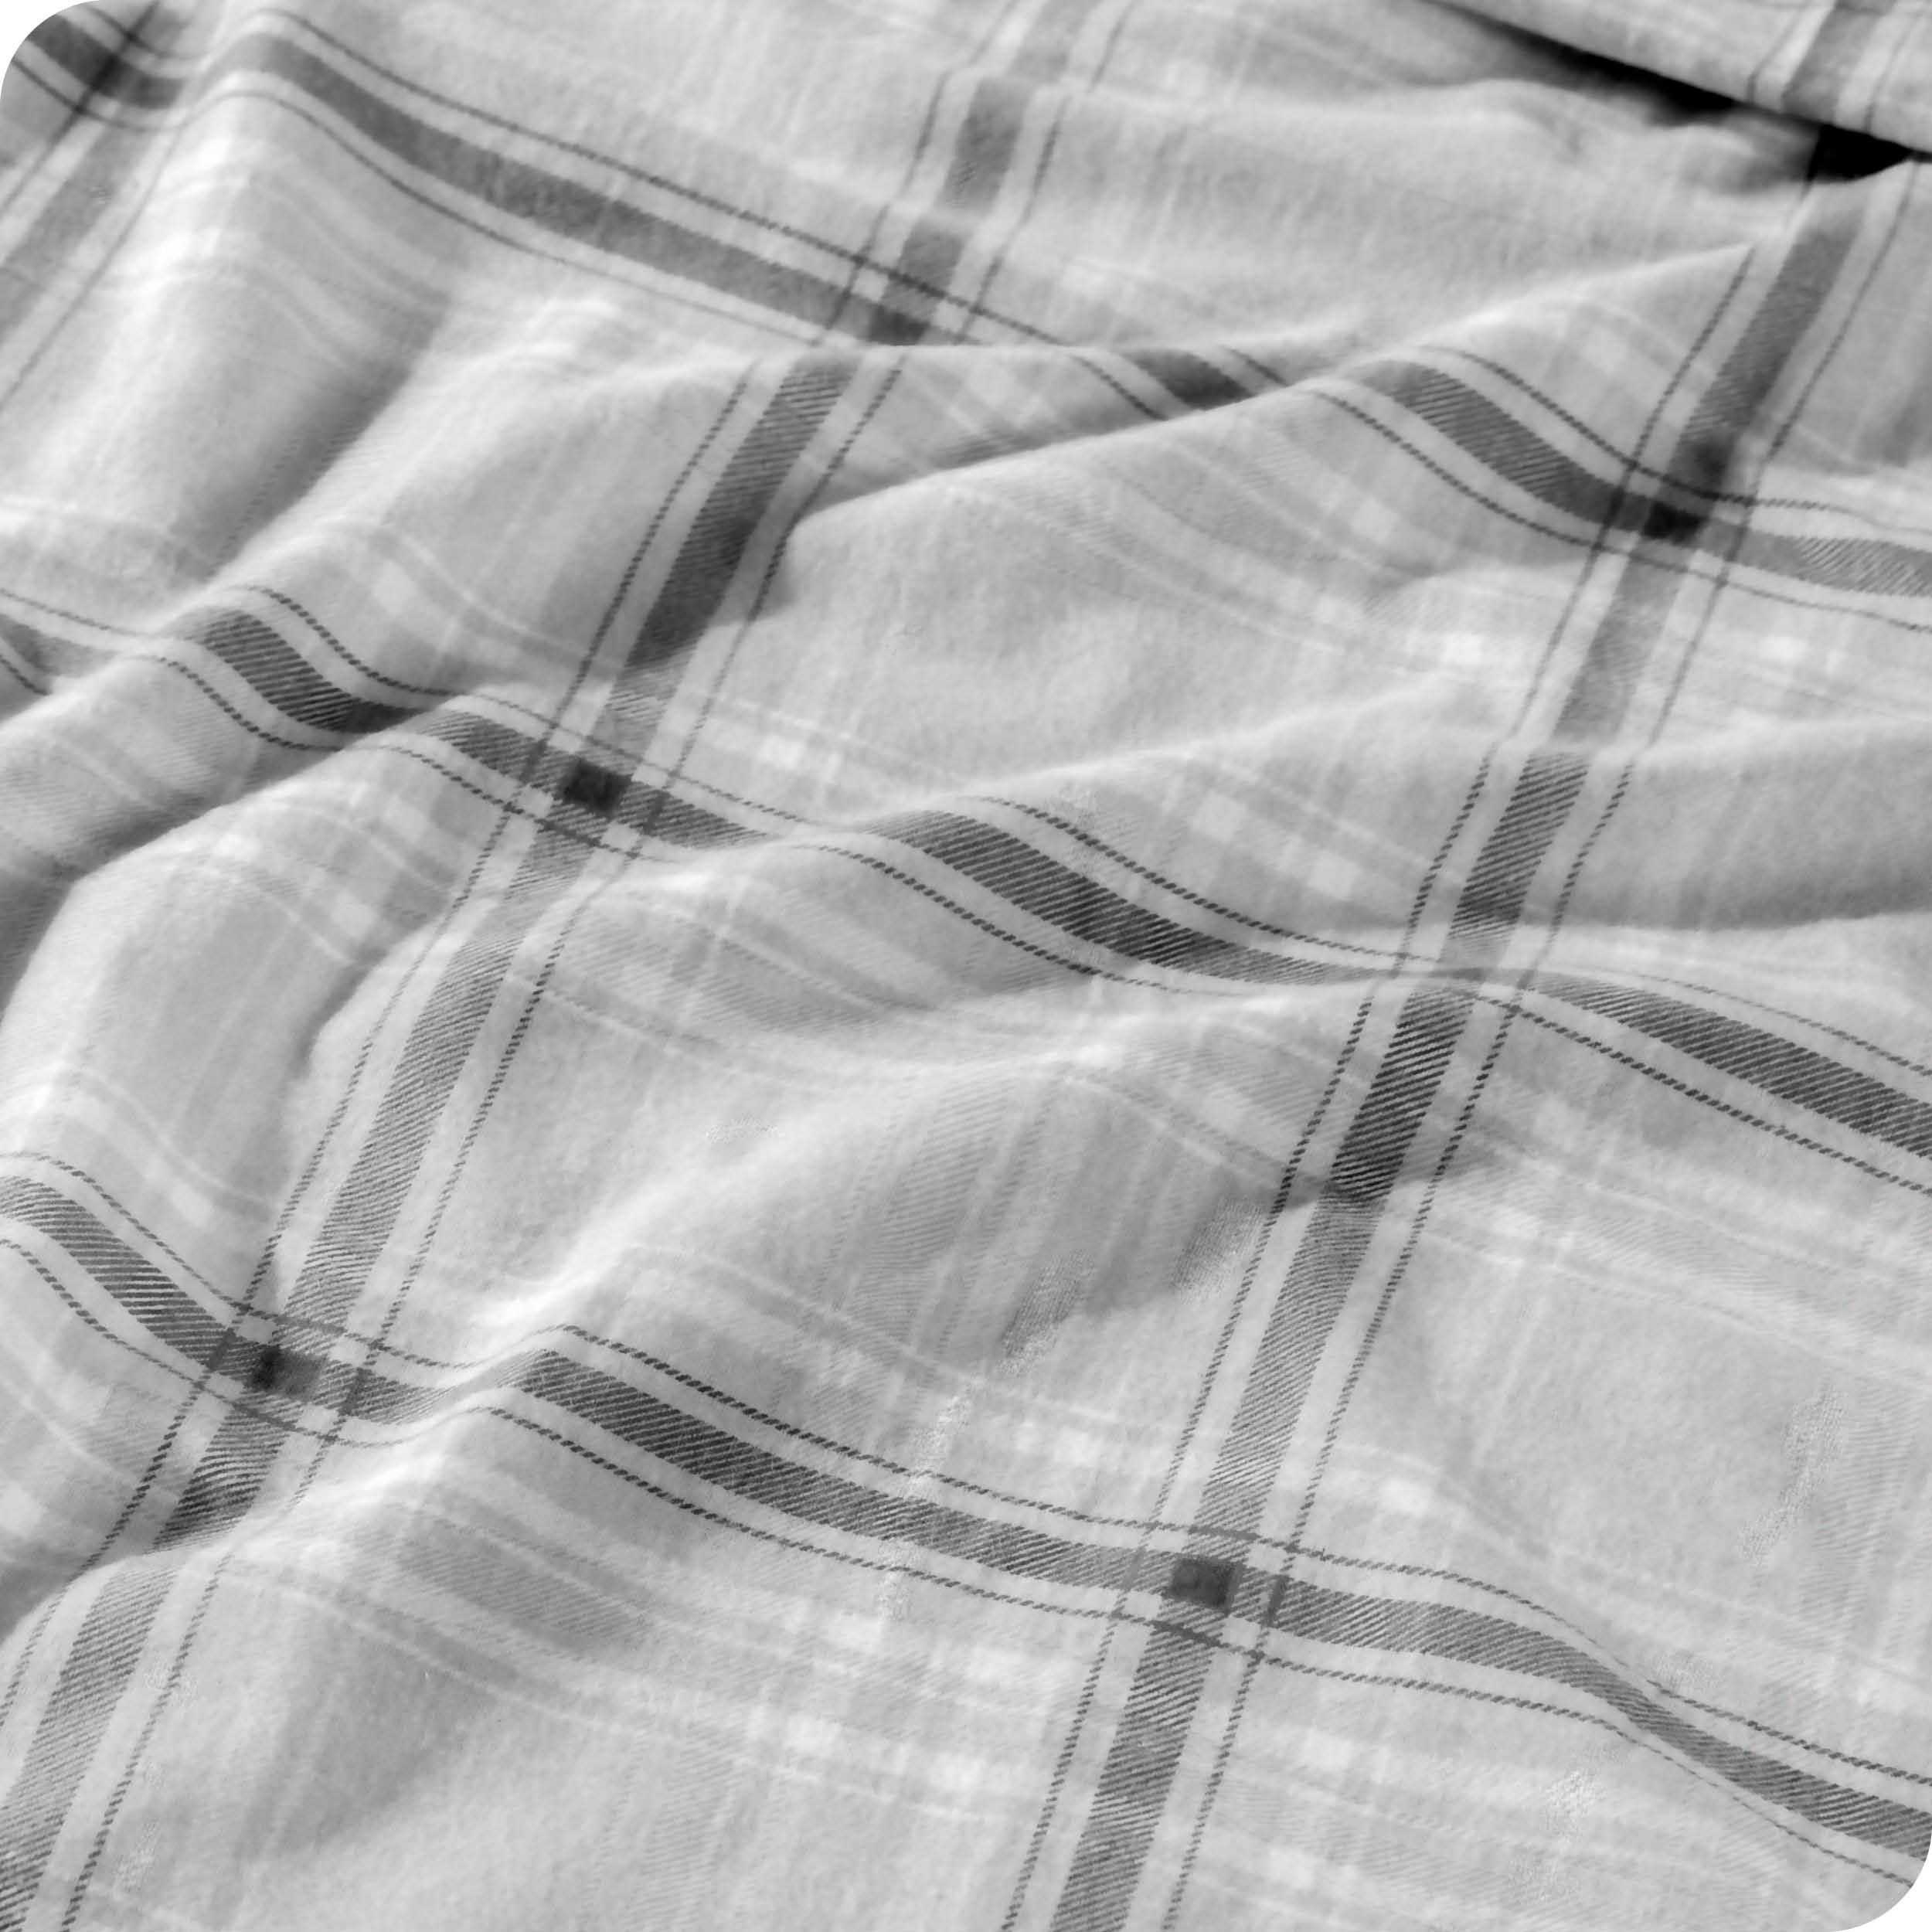 Close up of a plaid sheet showing the print